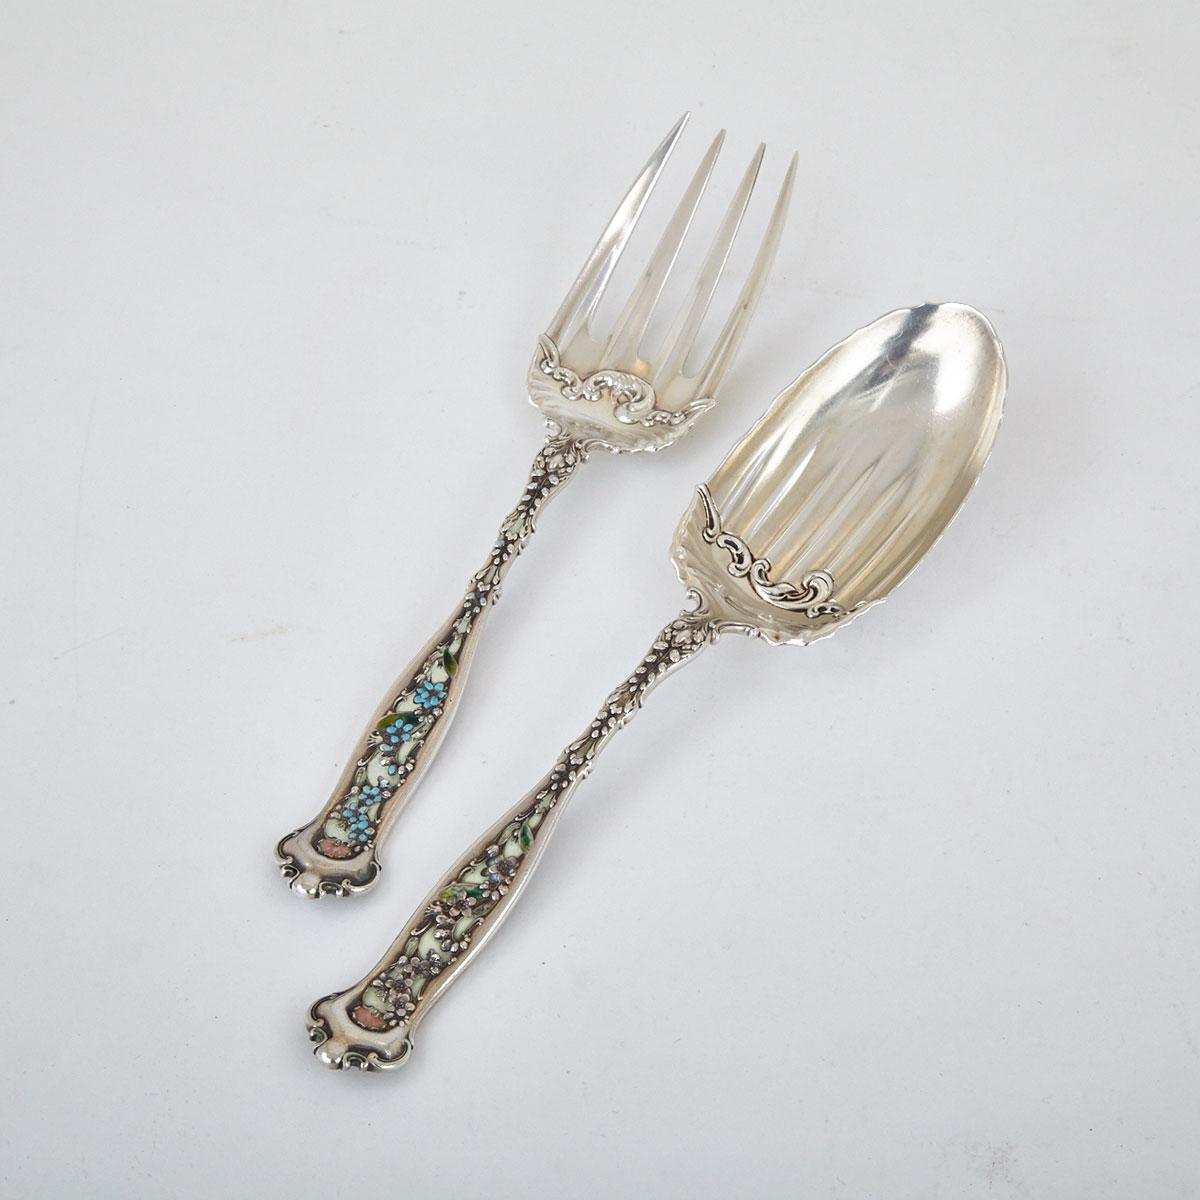 American Enameled Silver Serving Spoon and Fork, Whiting Mfg. Co., New York, N.Y., c.1900